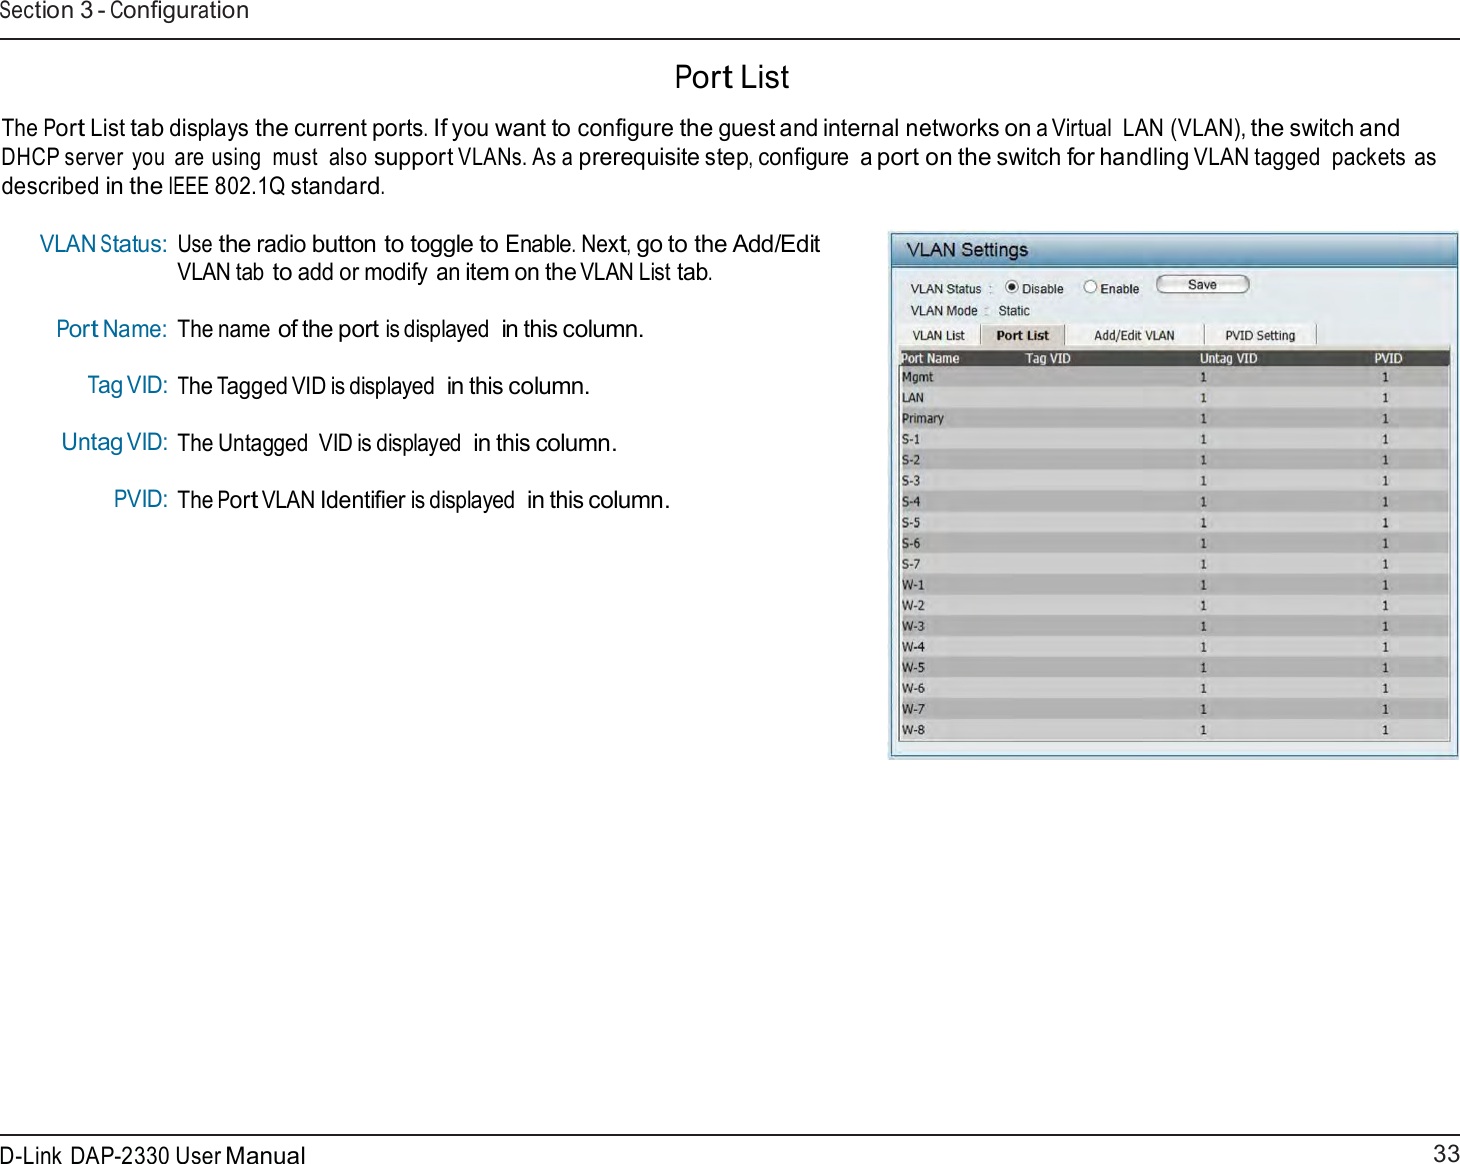 33 D-Link DAP-2330 User ManualSection 3 - Configuration    Port List  The Port List tab displays the current ports. If you want to configure the guest and internal networks on a Virtual  LAN (VLAN), the switch and DHCP server  you  are using  must  also support VLANs. As a prerequisite step, configure  a port on the switch for handling VLAN tagged  packets as described in the IEEE 802.1Q standard.  VLAN Status:    Port Name: Tag VID: Untag VID: PVID: Use the radio button to toggle to Enable. Next, go to the Add/Edit VLAN tab to add or modify an item on the VLAN List tab. The name of the port is displayed in this column. The Tagged VID is displayed in this column. The Untagged  VID is displayed in this column. The Port VLAN Identifier is displayed in this column. 